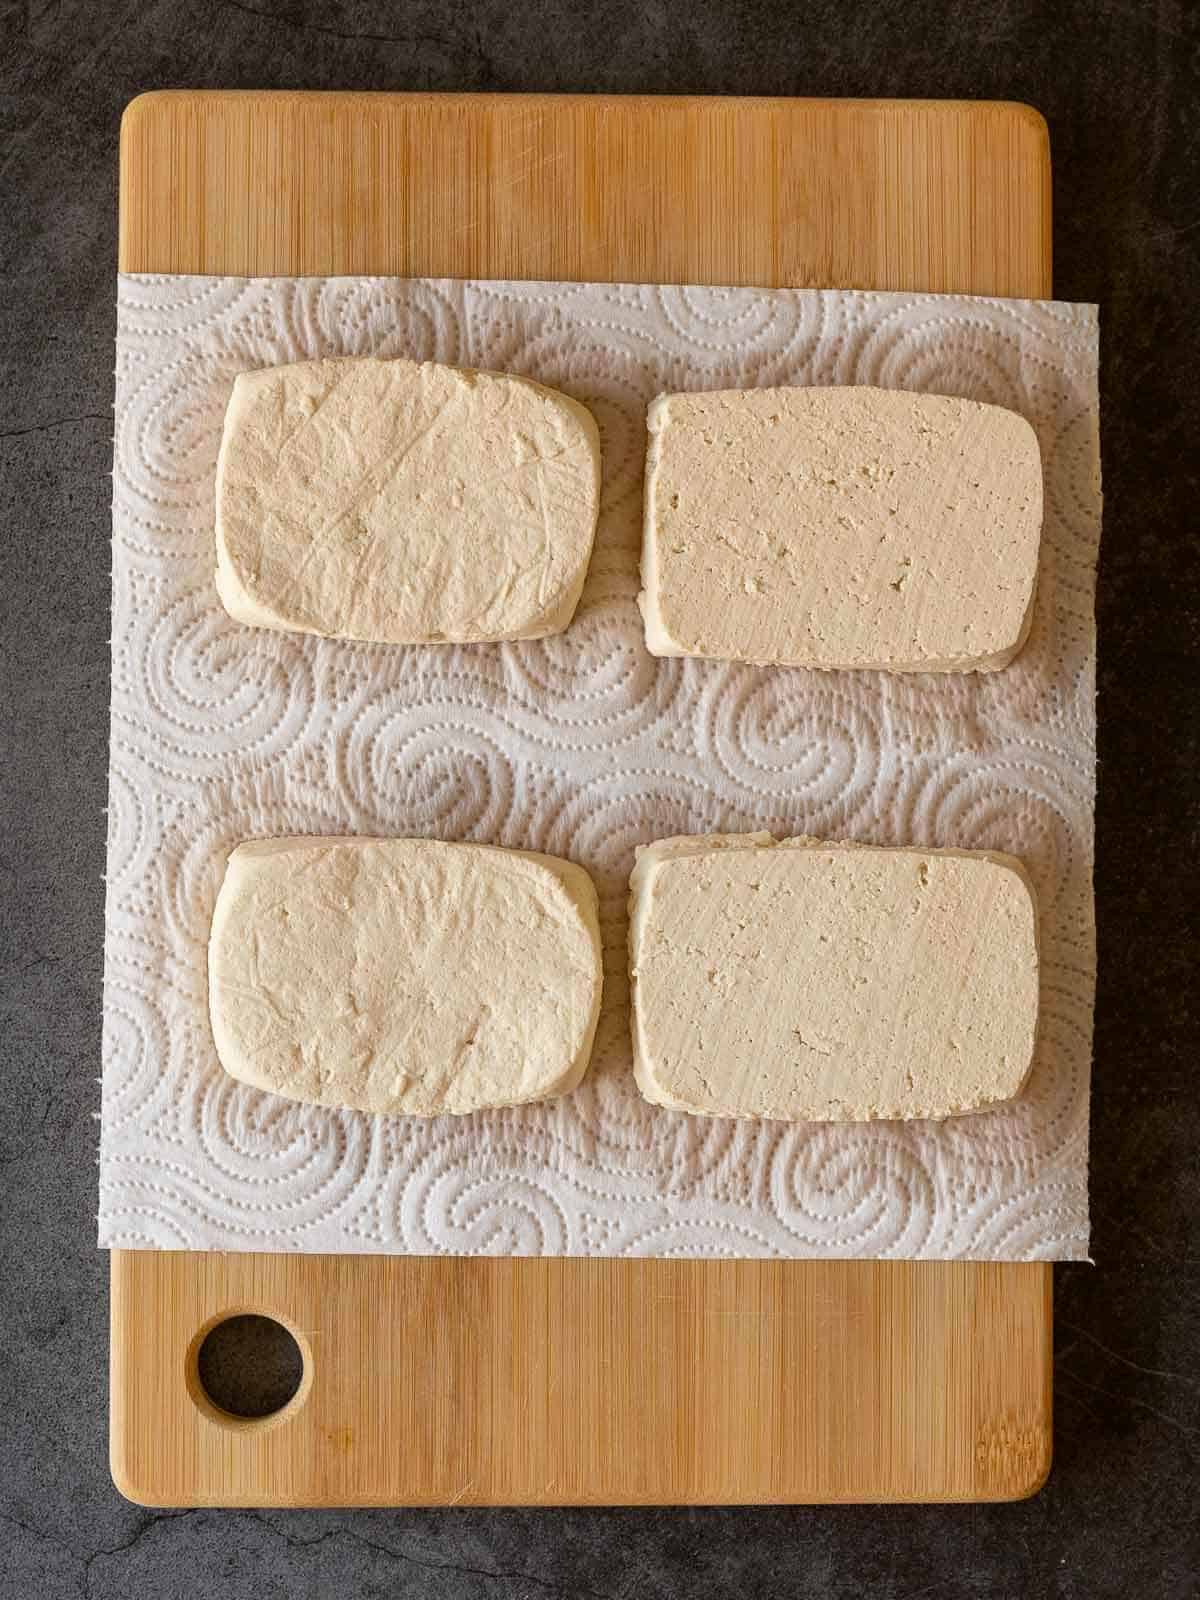 tofu slices on top of paper towels.